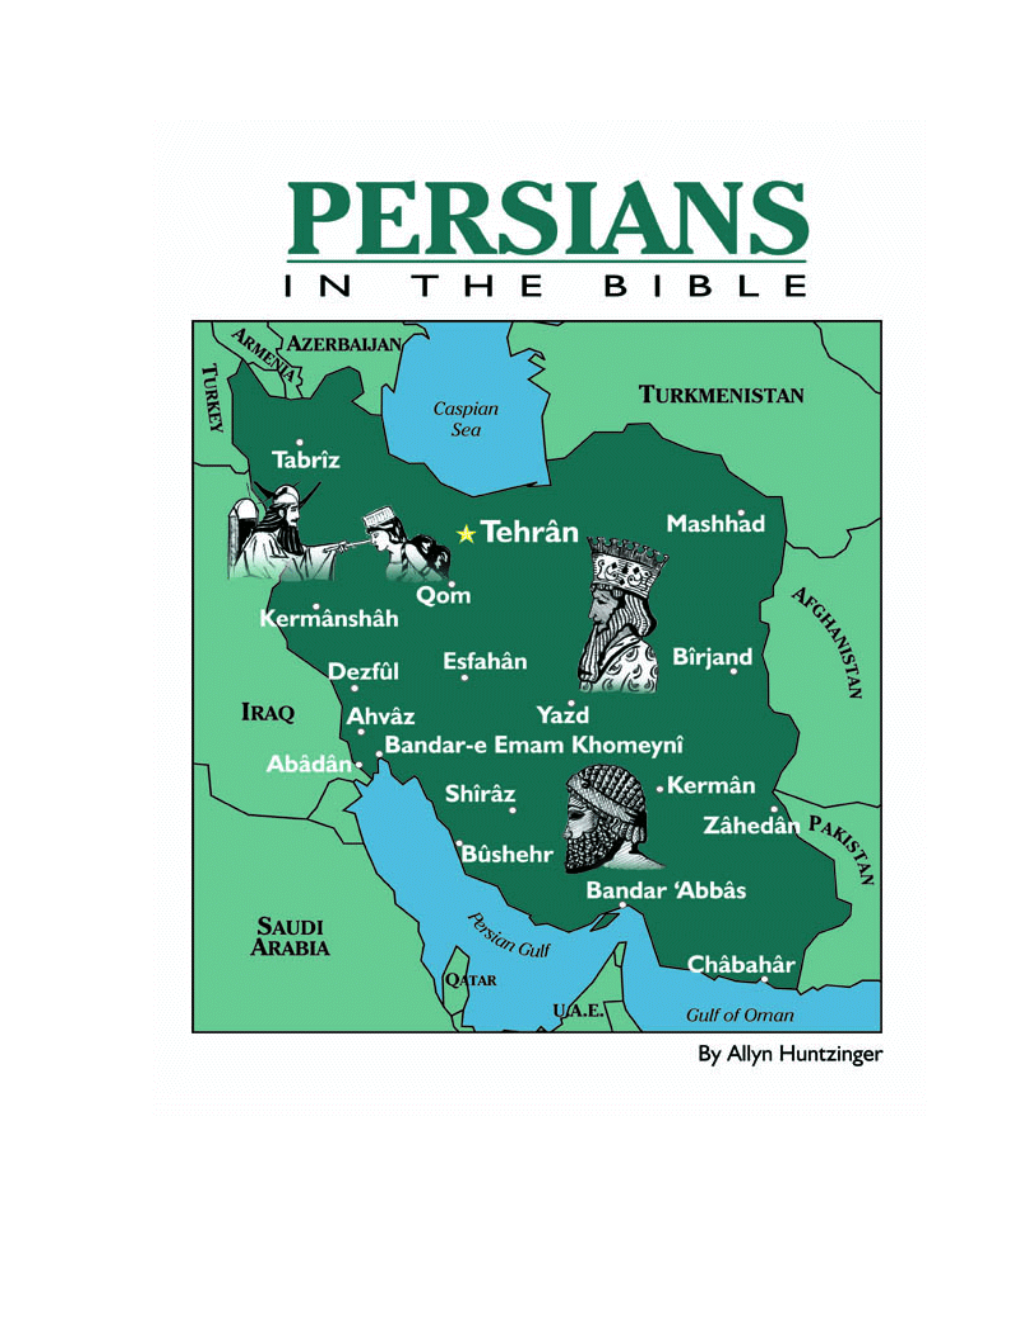 Persians in the Bible